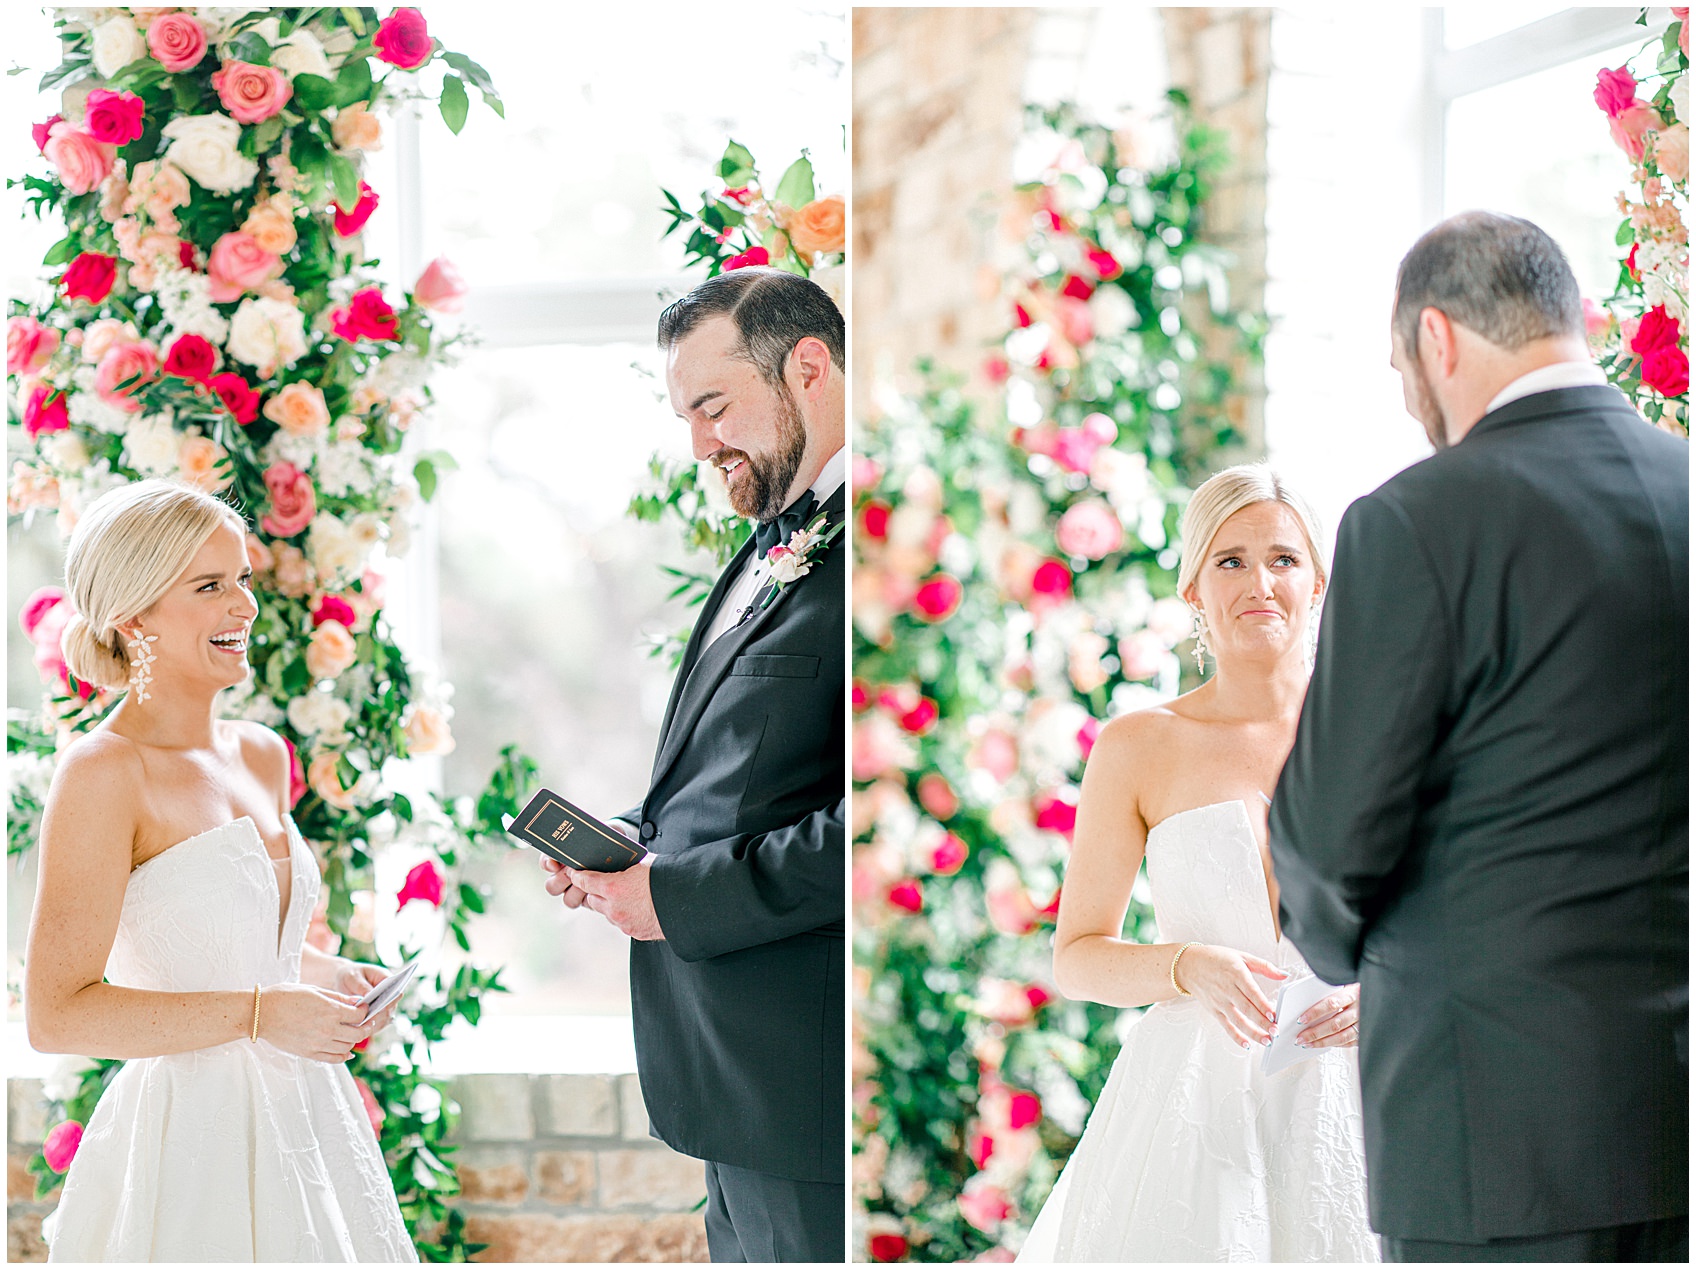 Pink Floral Spring Wedding at The Chandelier of Gruene By Allison Jeffers Wedding Photography 0026 1